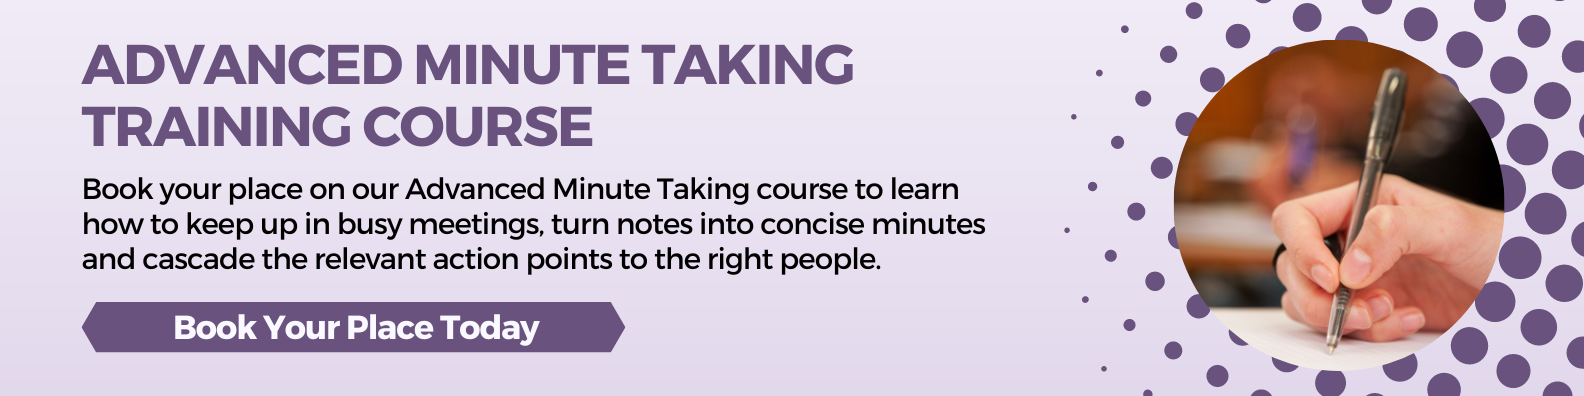 Advanced Minute Taking Online Training Course